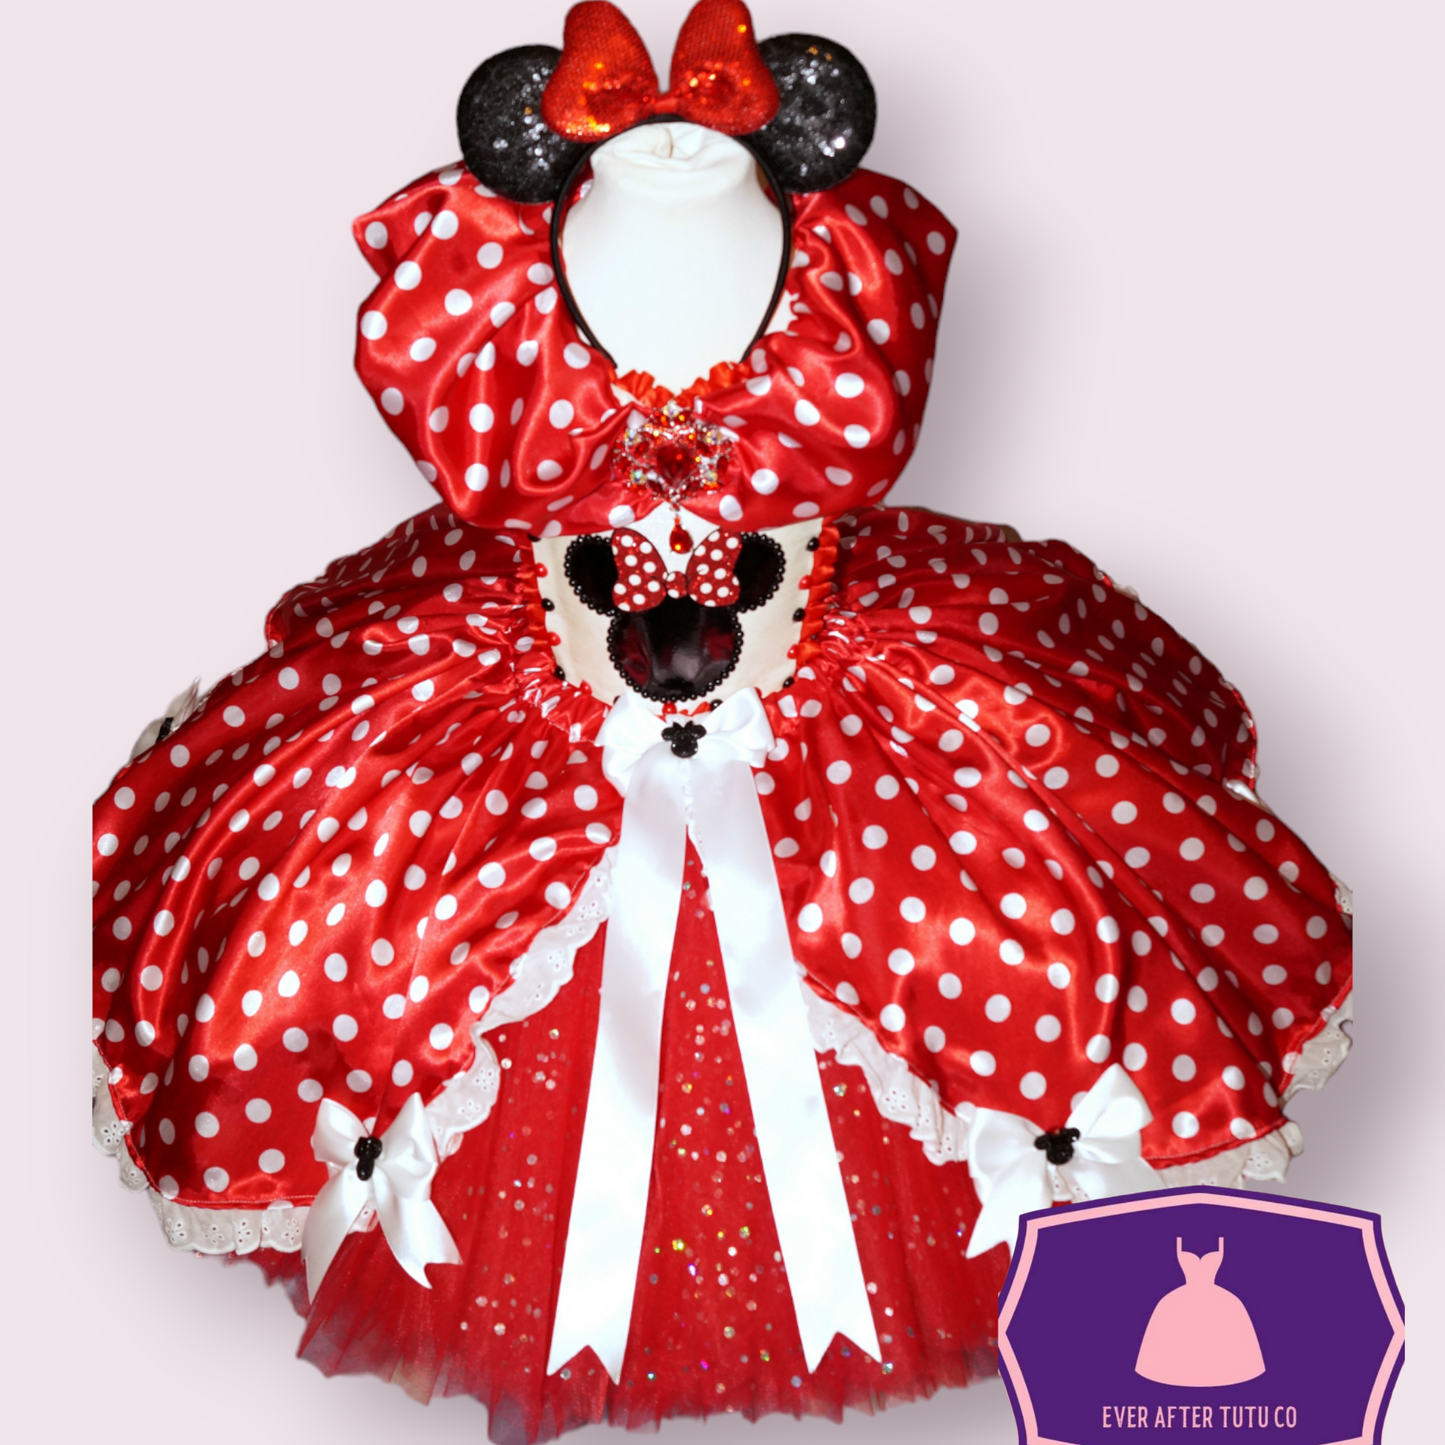 Disney Red and White Polka Dot Minnie Mouse Inspired Tutu Dress